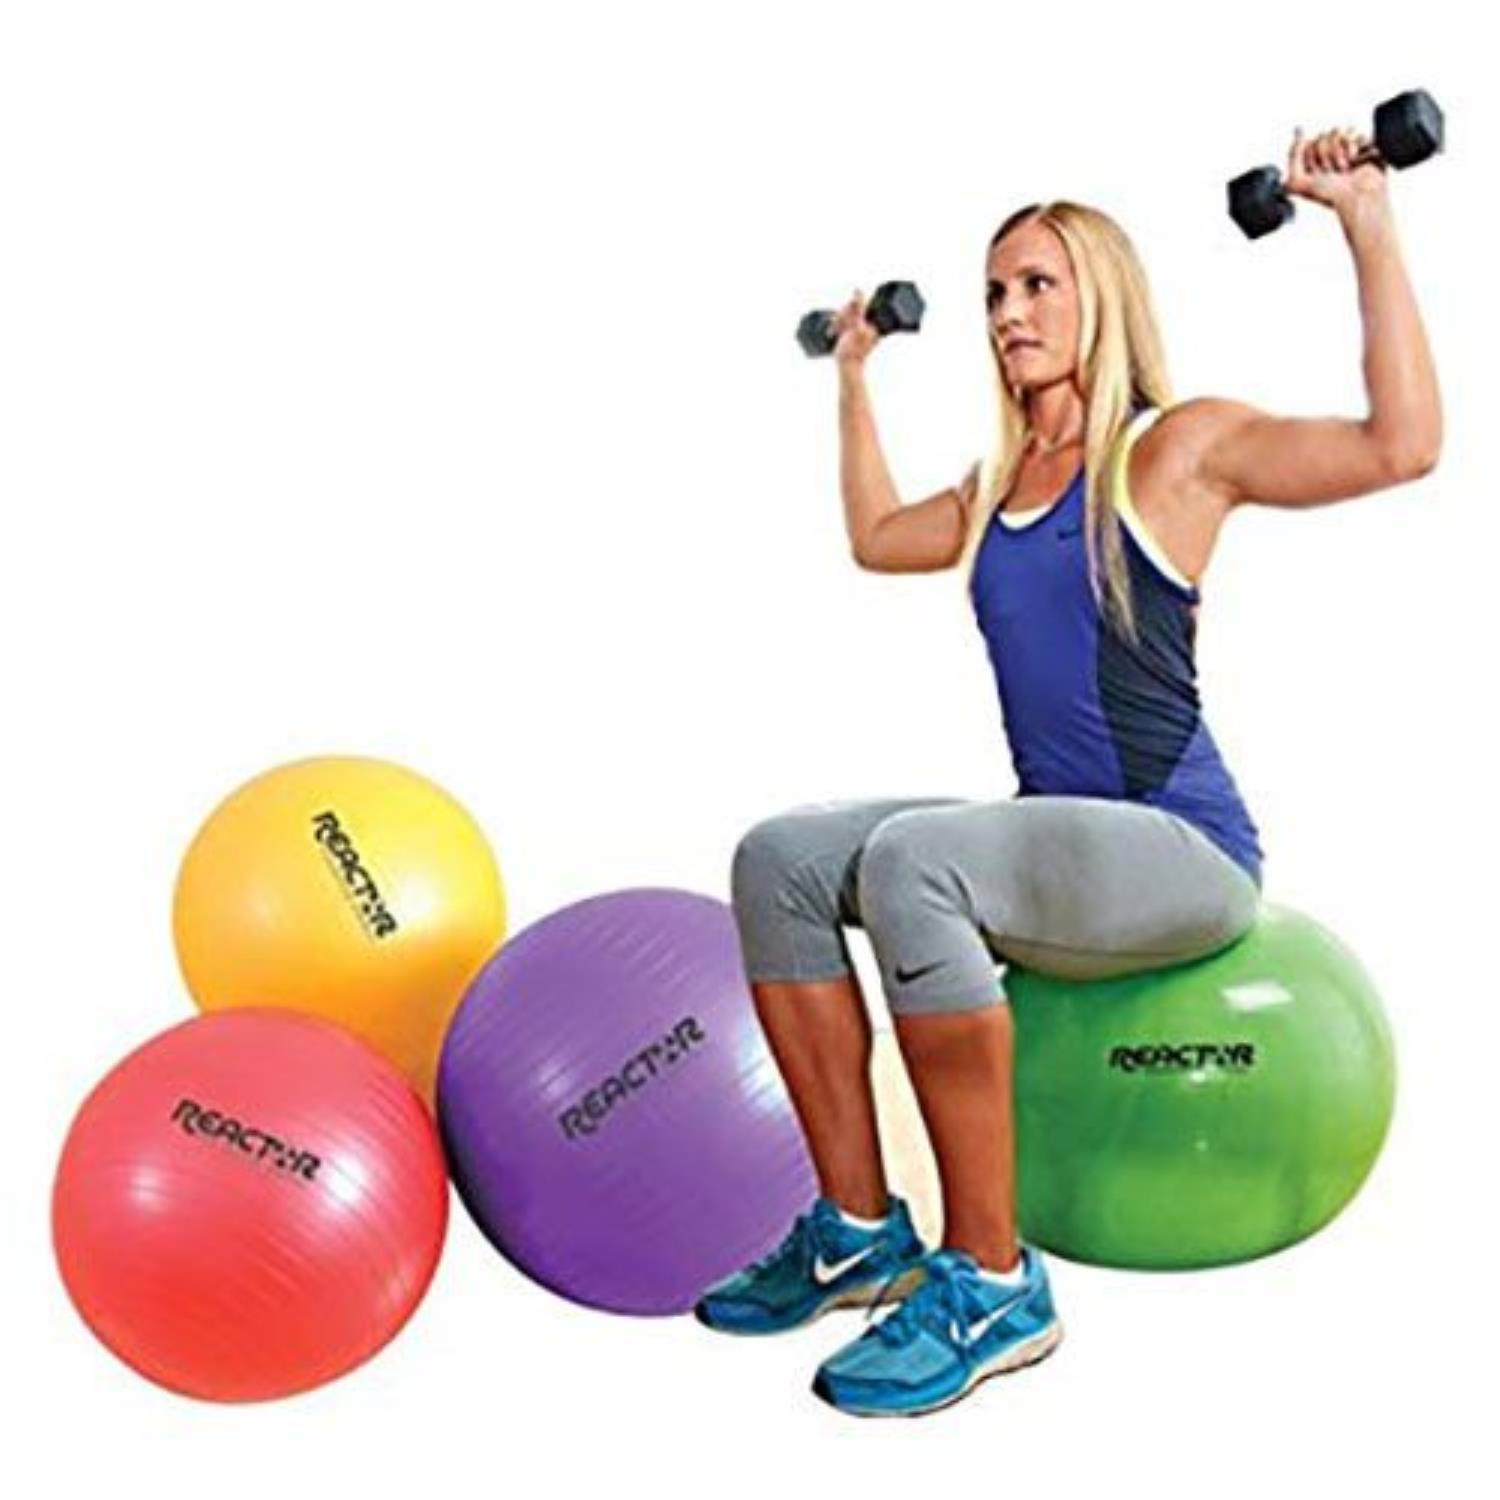 Athletic Connection Reactor by Champion Barbell Core Stability Balls